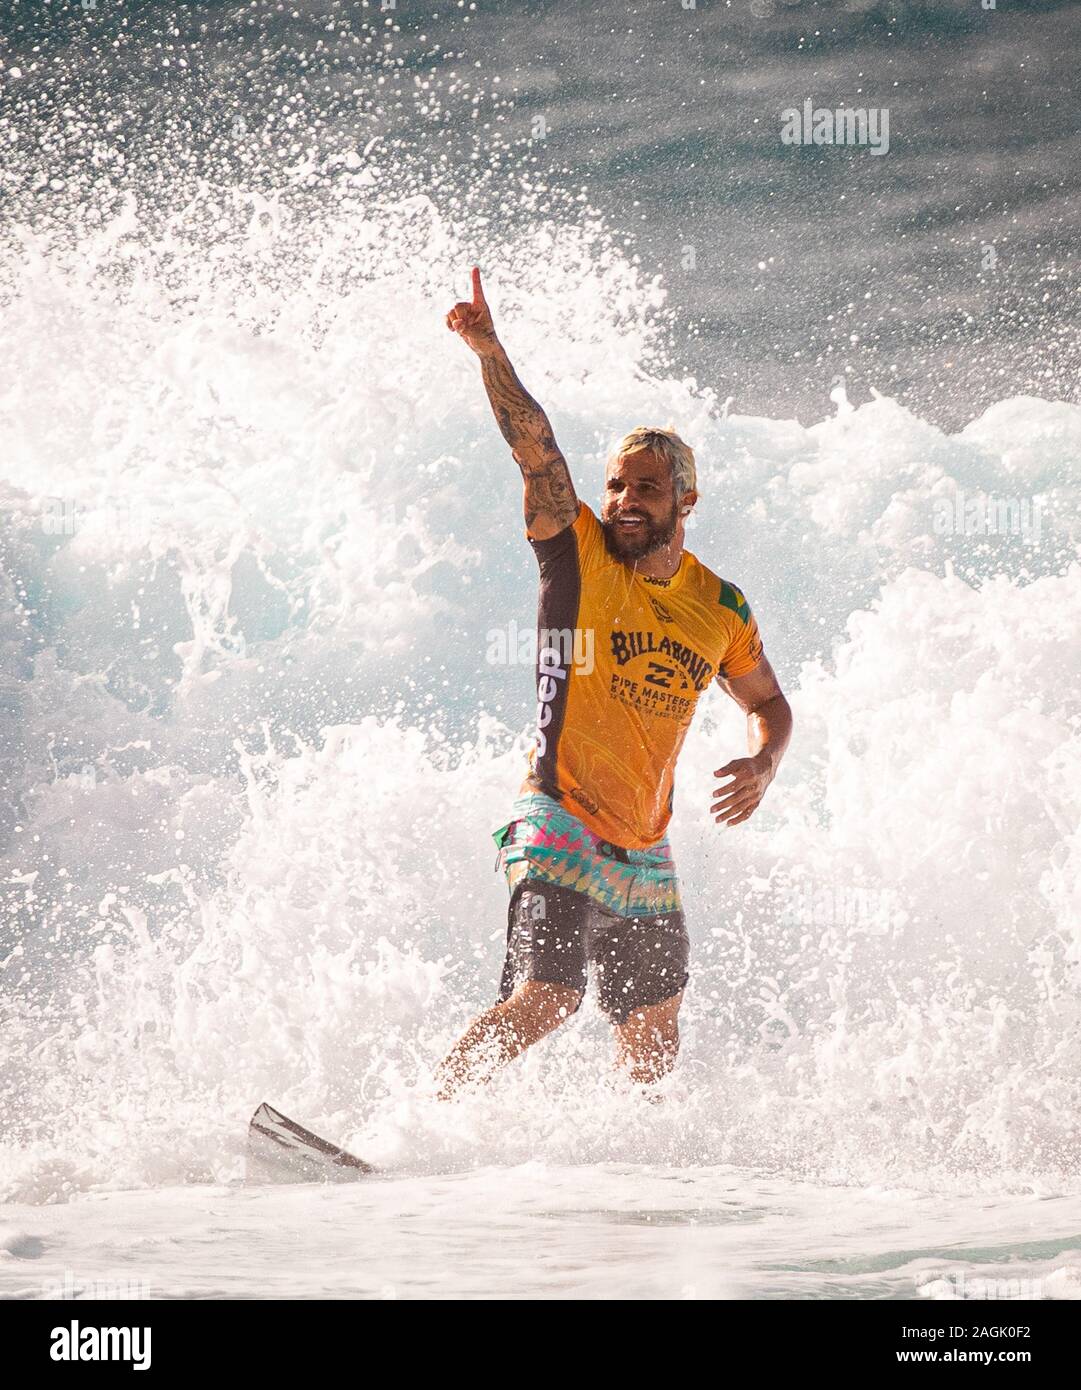 Haleiwa, HI, USA. 19th Dec, 2019. Italo Ferreira pictured at 2019 Billabong  Pipe Masters Finals day in Haleiwa, HI on December 19, 2019. Italo Ferreira  won the Pipe Masters and also the